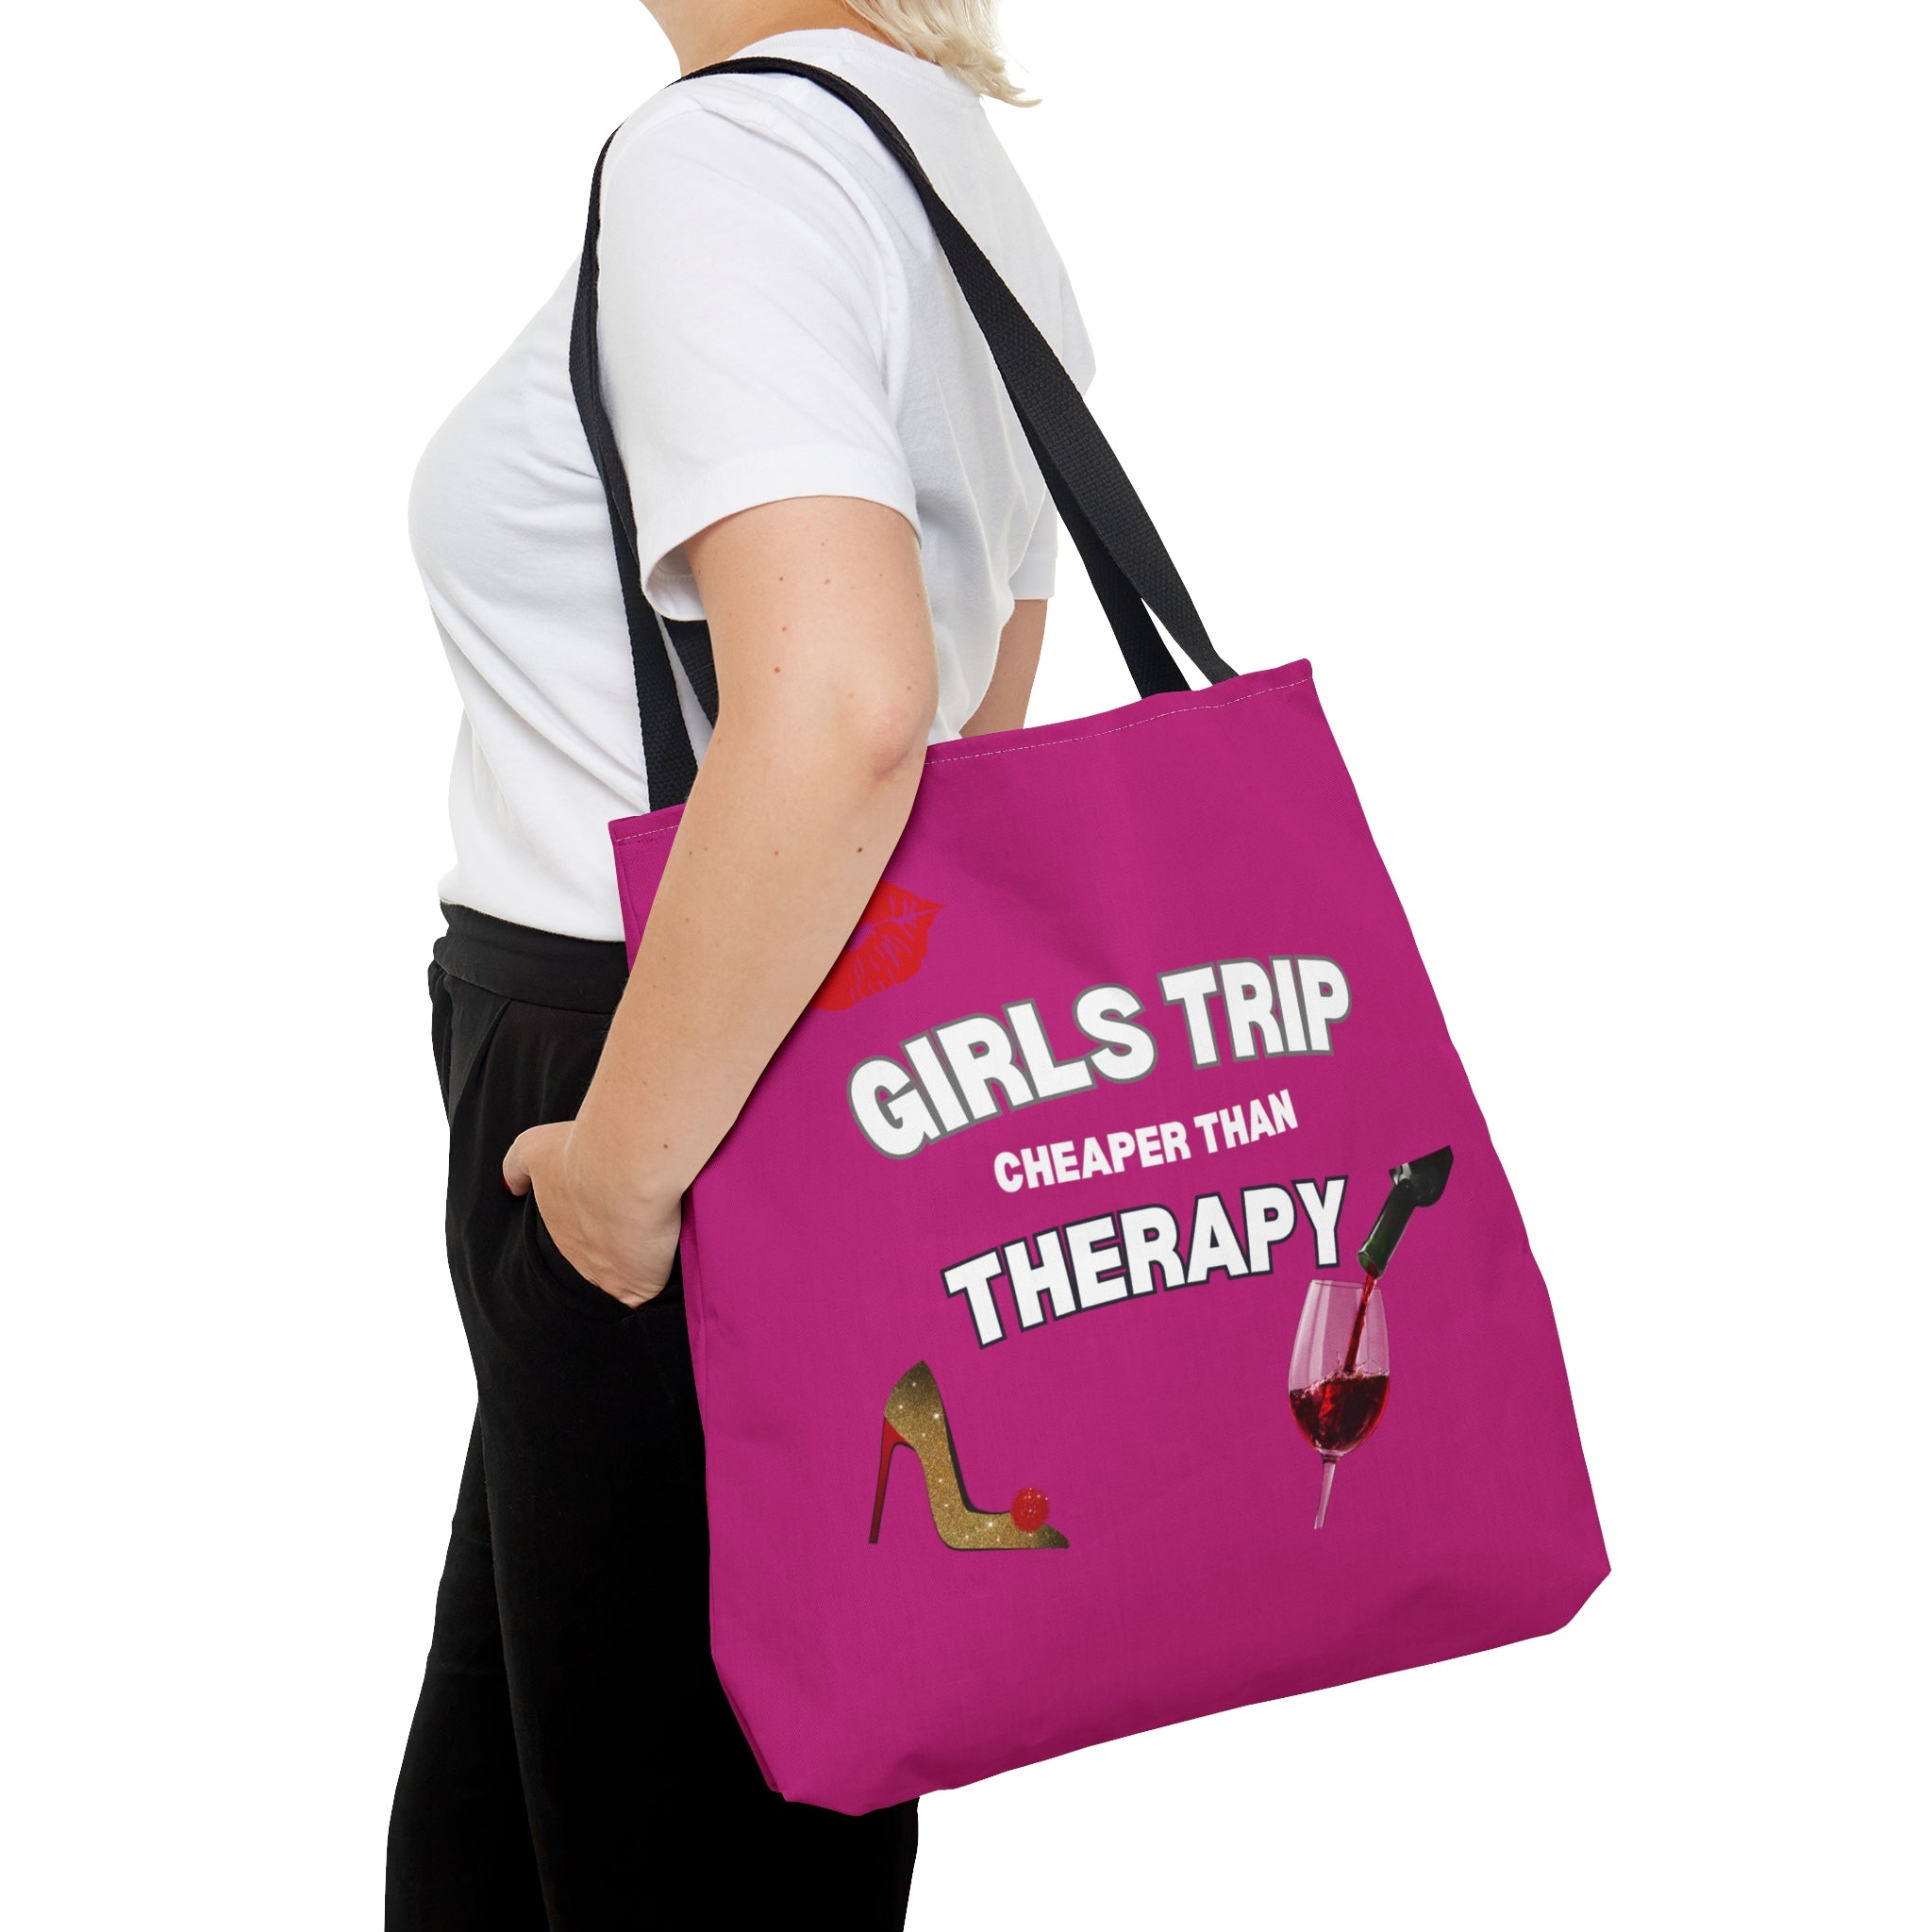 GIRLS TRIP CHEAPER THAN THERAPY TOTE BAG